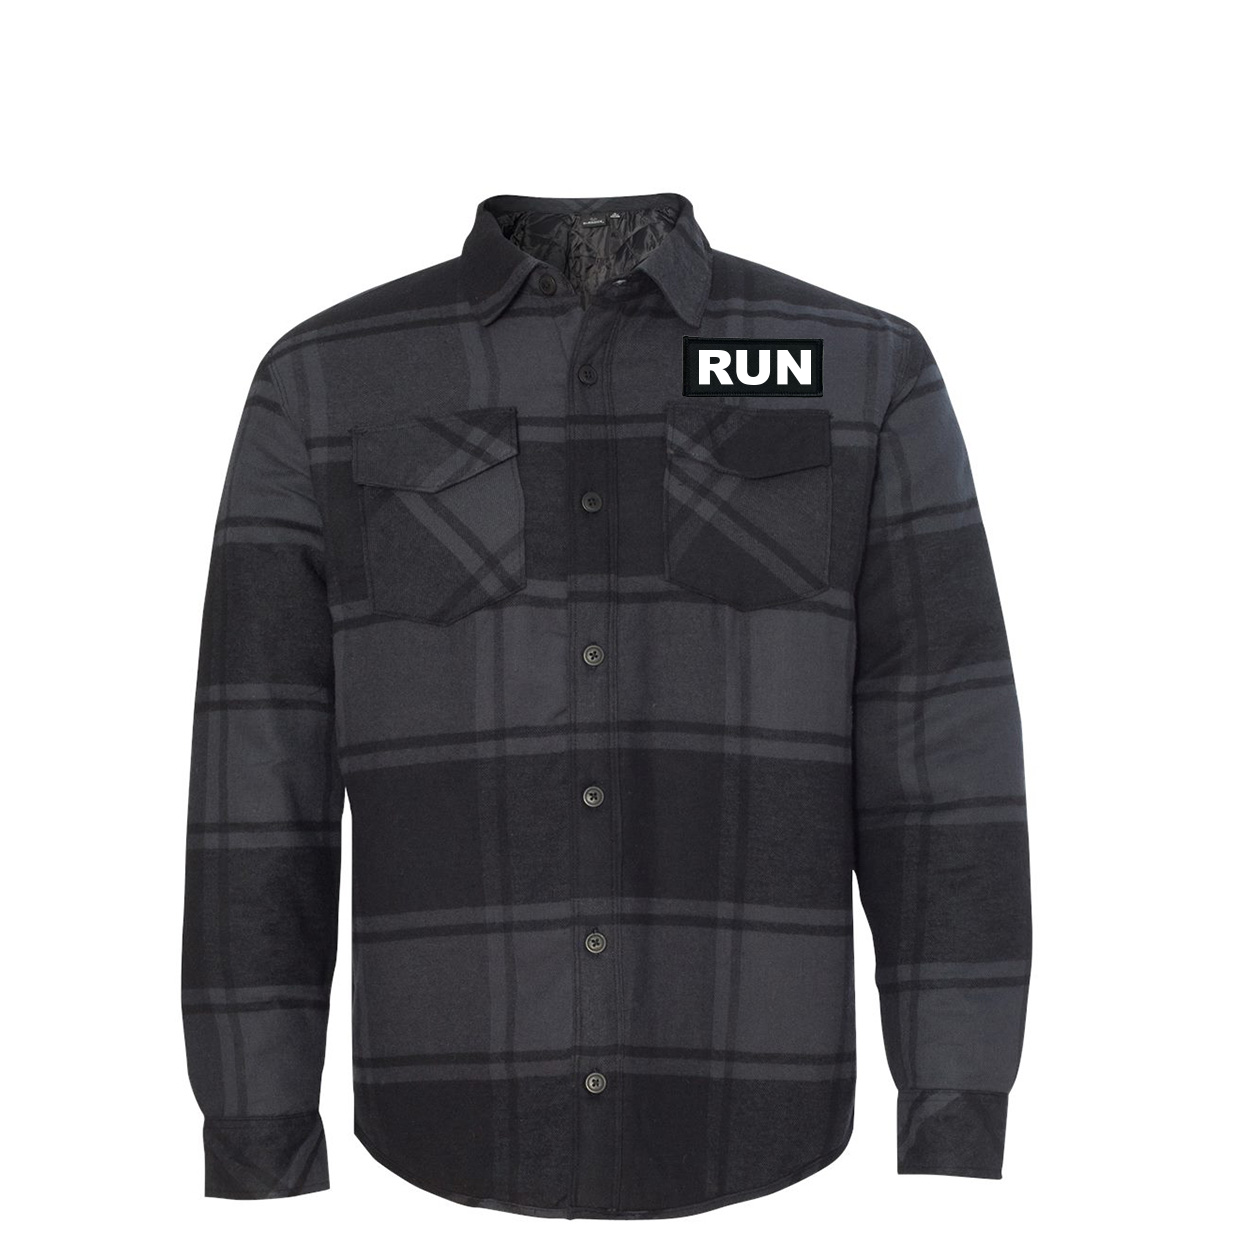 Run Brand Logo Classic Unisex Woven Patch Quilted Button Flannel Jacket Black/Plaid (White Logo)